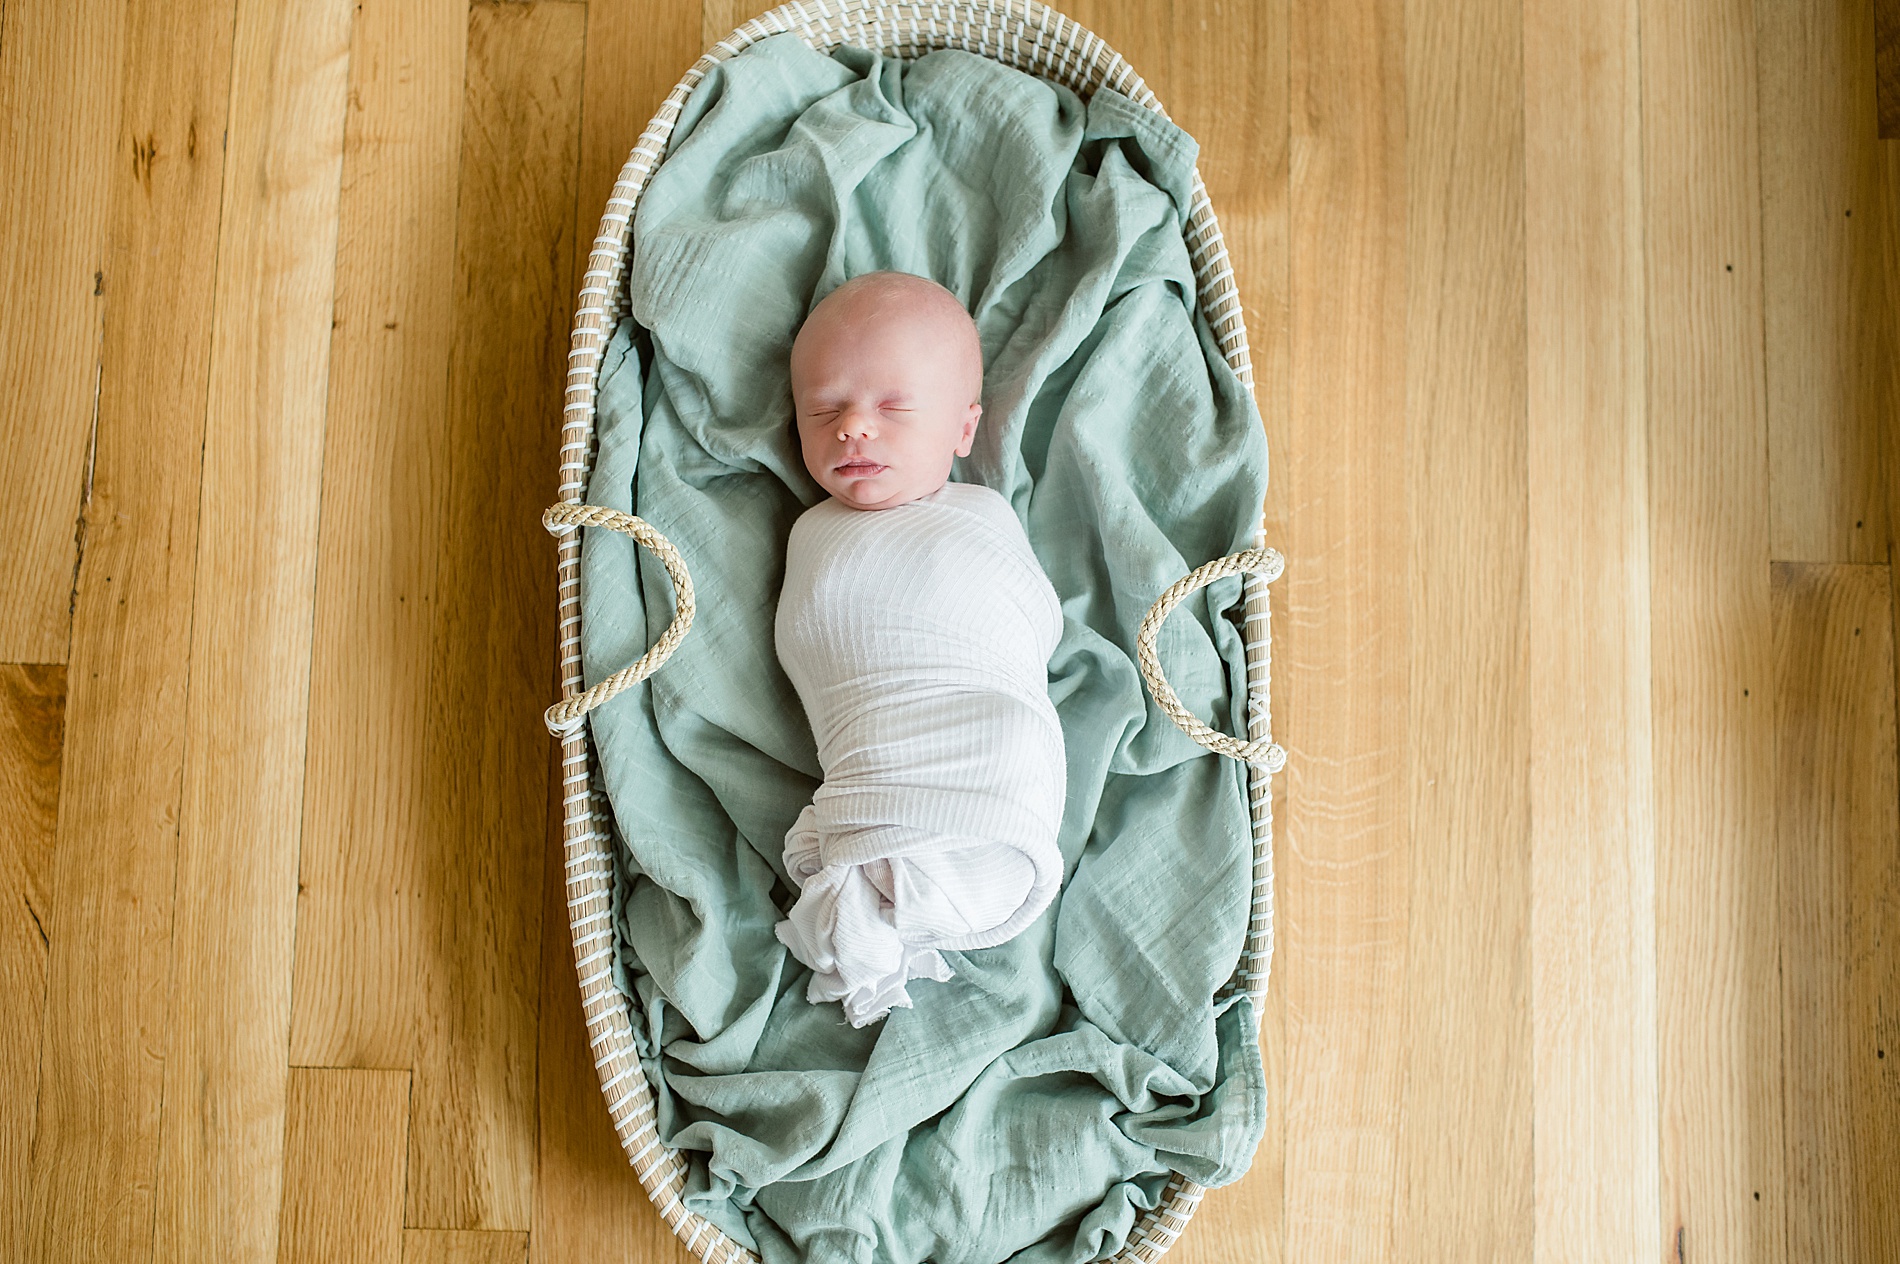 baby boy swaddled in blanket sleeps during Cozy In-Home Newborn Session photographed by Lindsey Dutton Photography, a Dallas Newborn photographer
